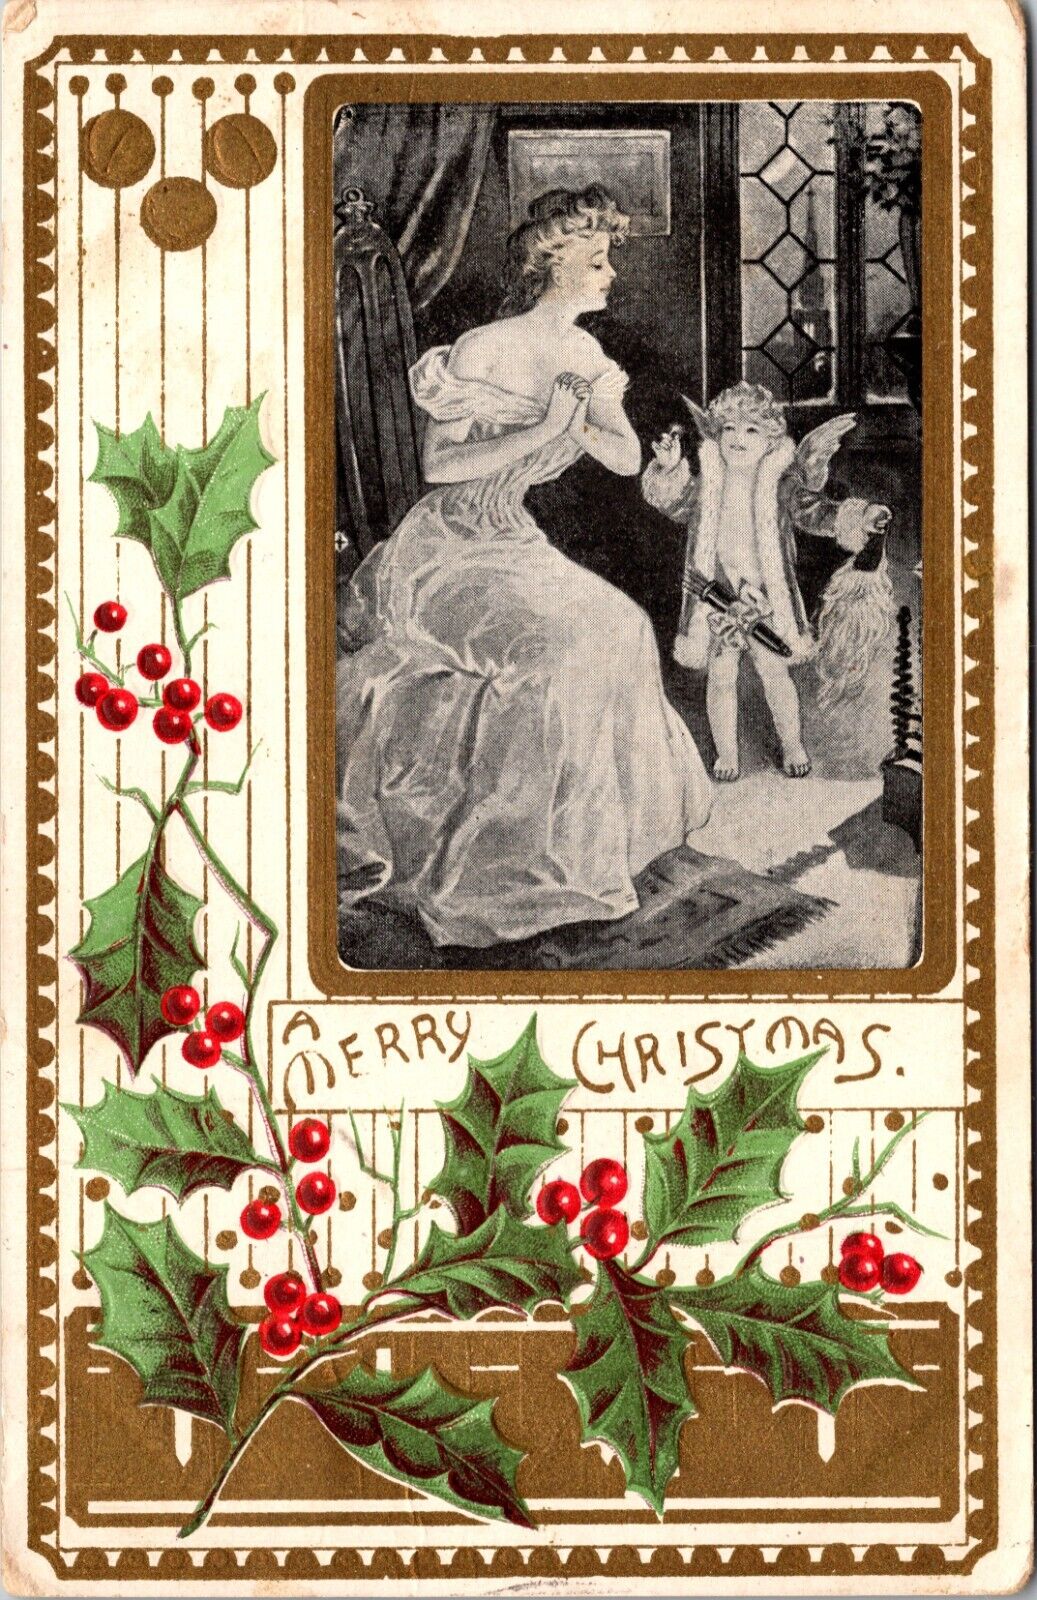 1907 A Merry Christmas Woman Child & Holly Vintage Postcard